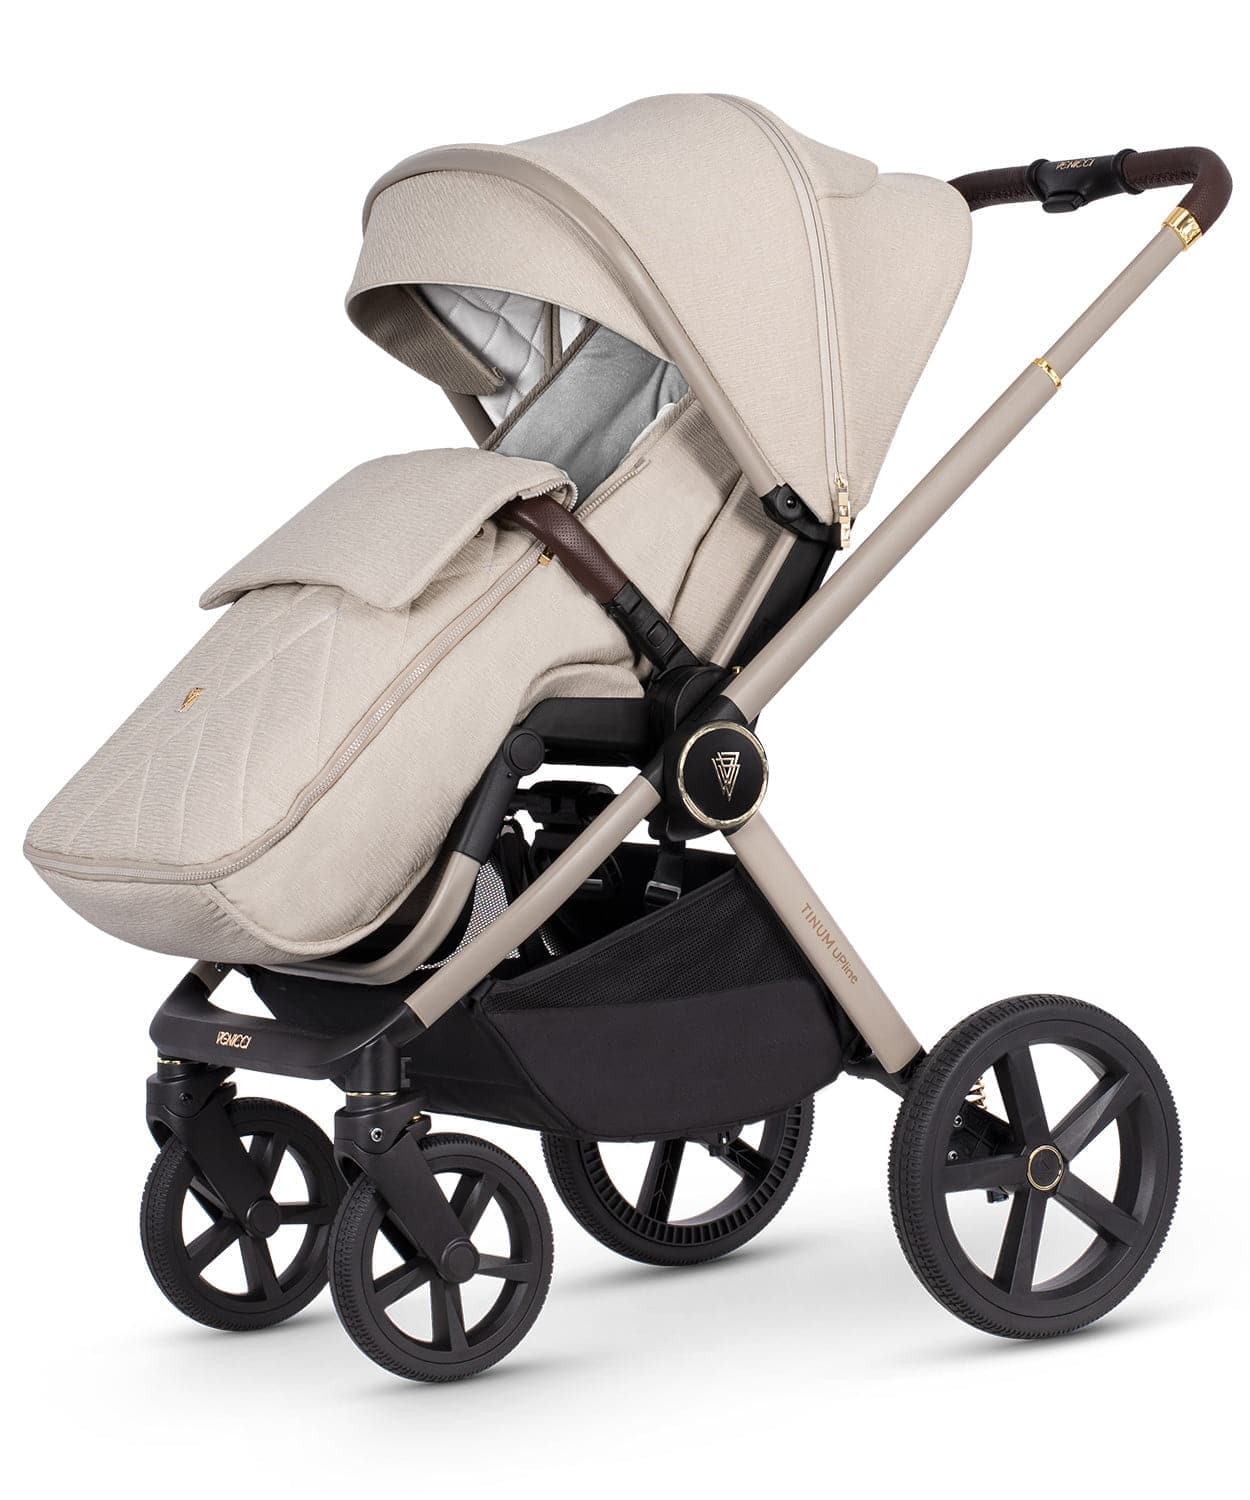 Venicci Tinum Upline 3 in 1 Travel System Bundle + Base - Stone Beige -  | For Your Little One